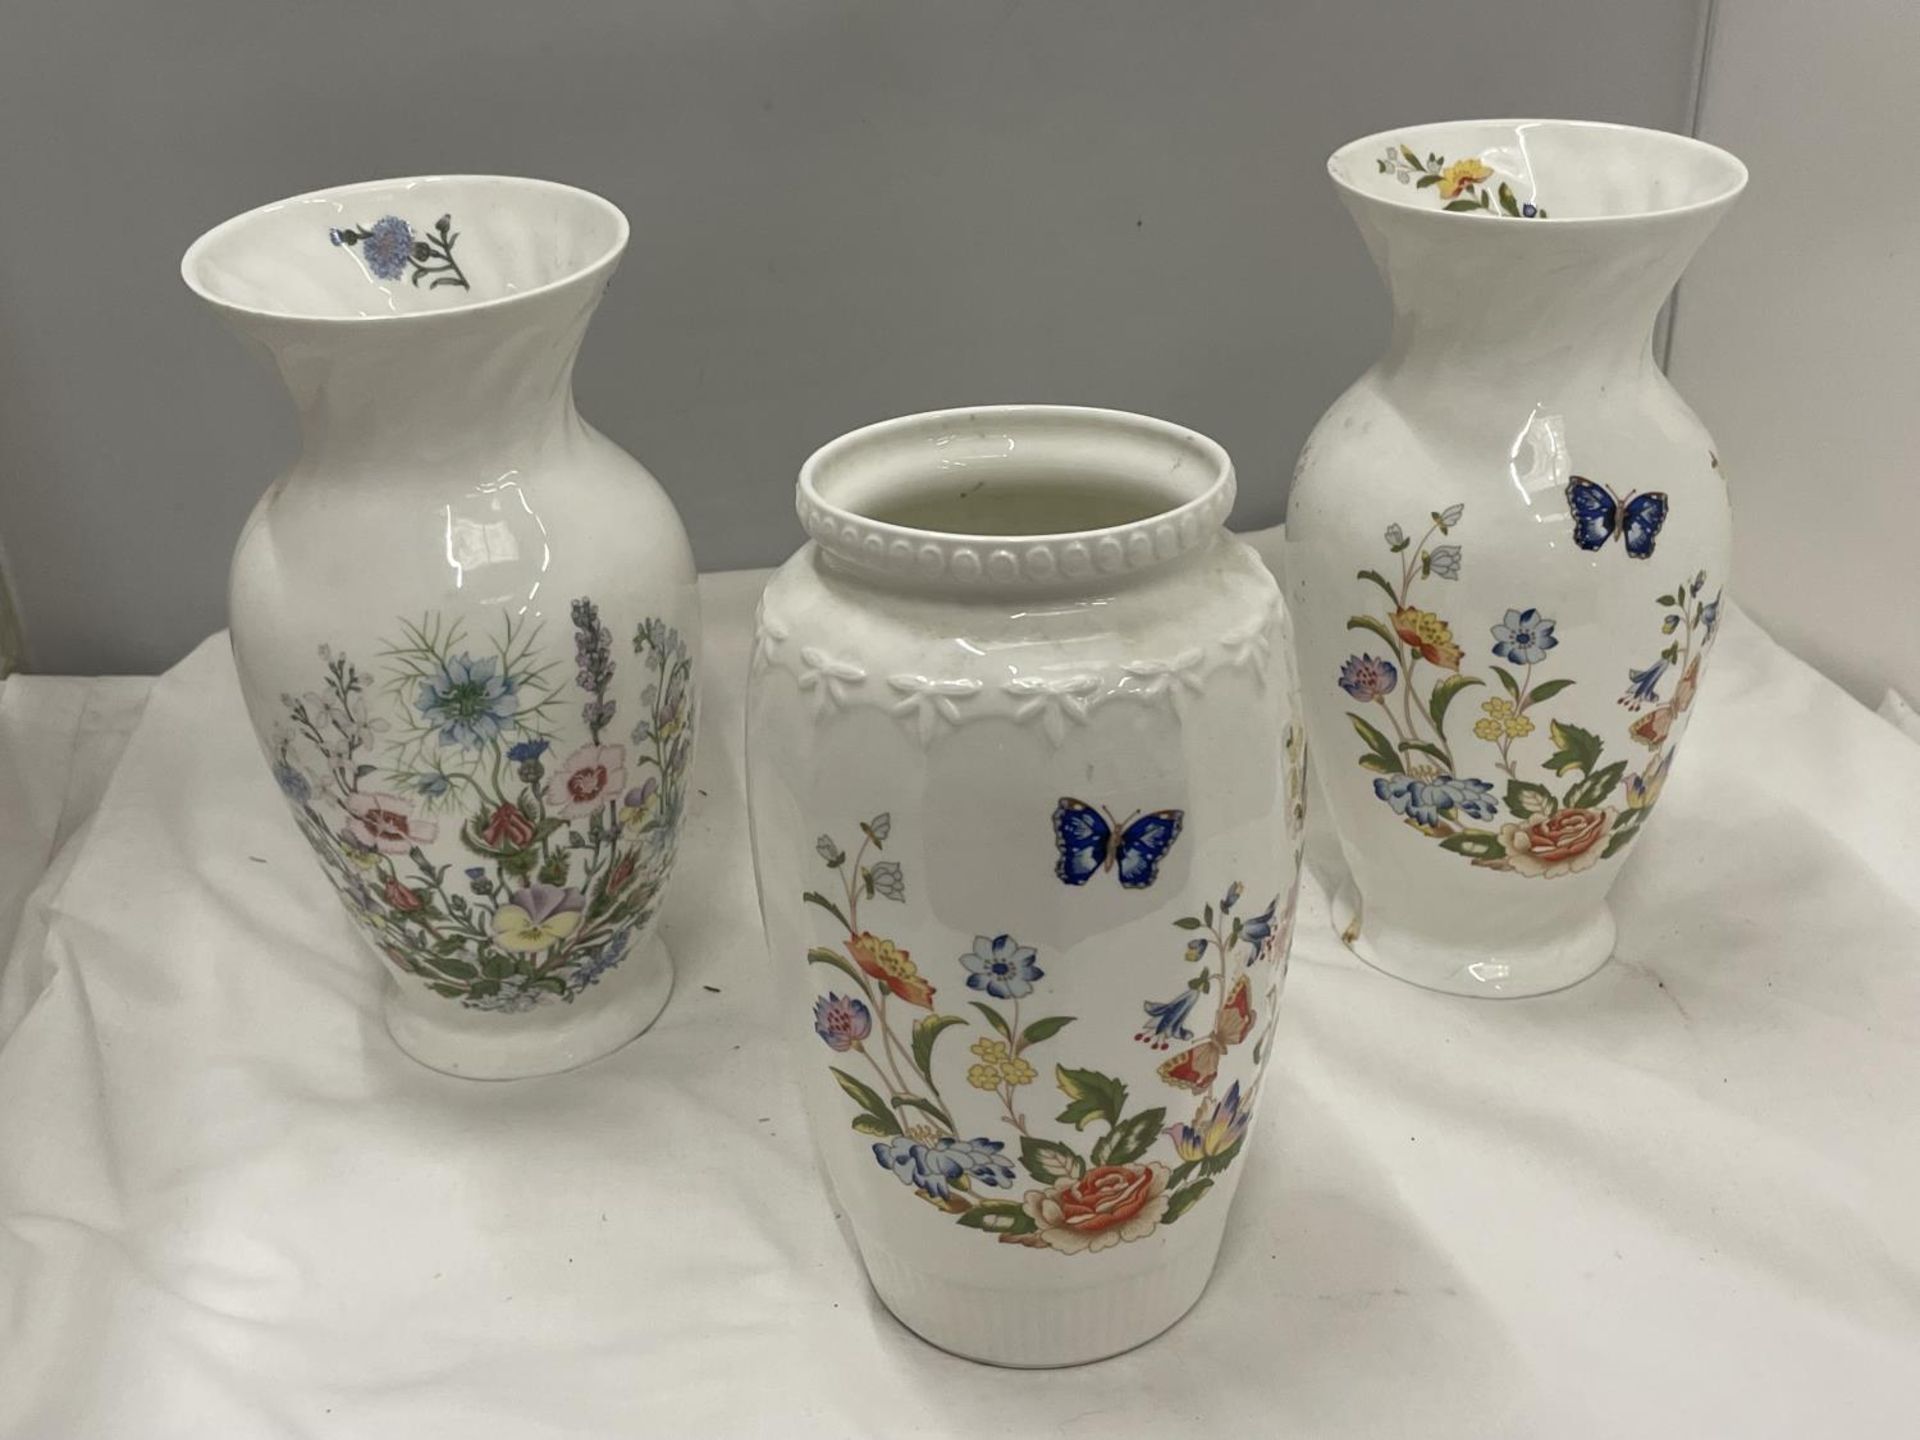 THREE LARGE AYNSLEY VASES, TWO IN THE COTTAGE GARDEN PATTERN, THE OTHER 'WILD TUDOR', HEIGHT 23CM